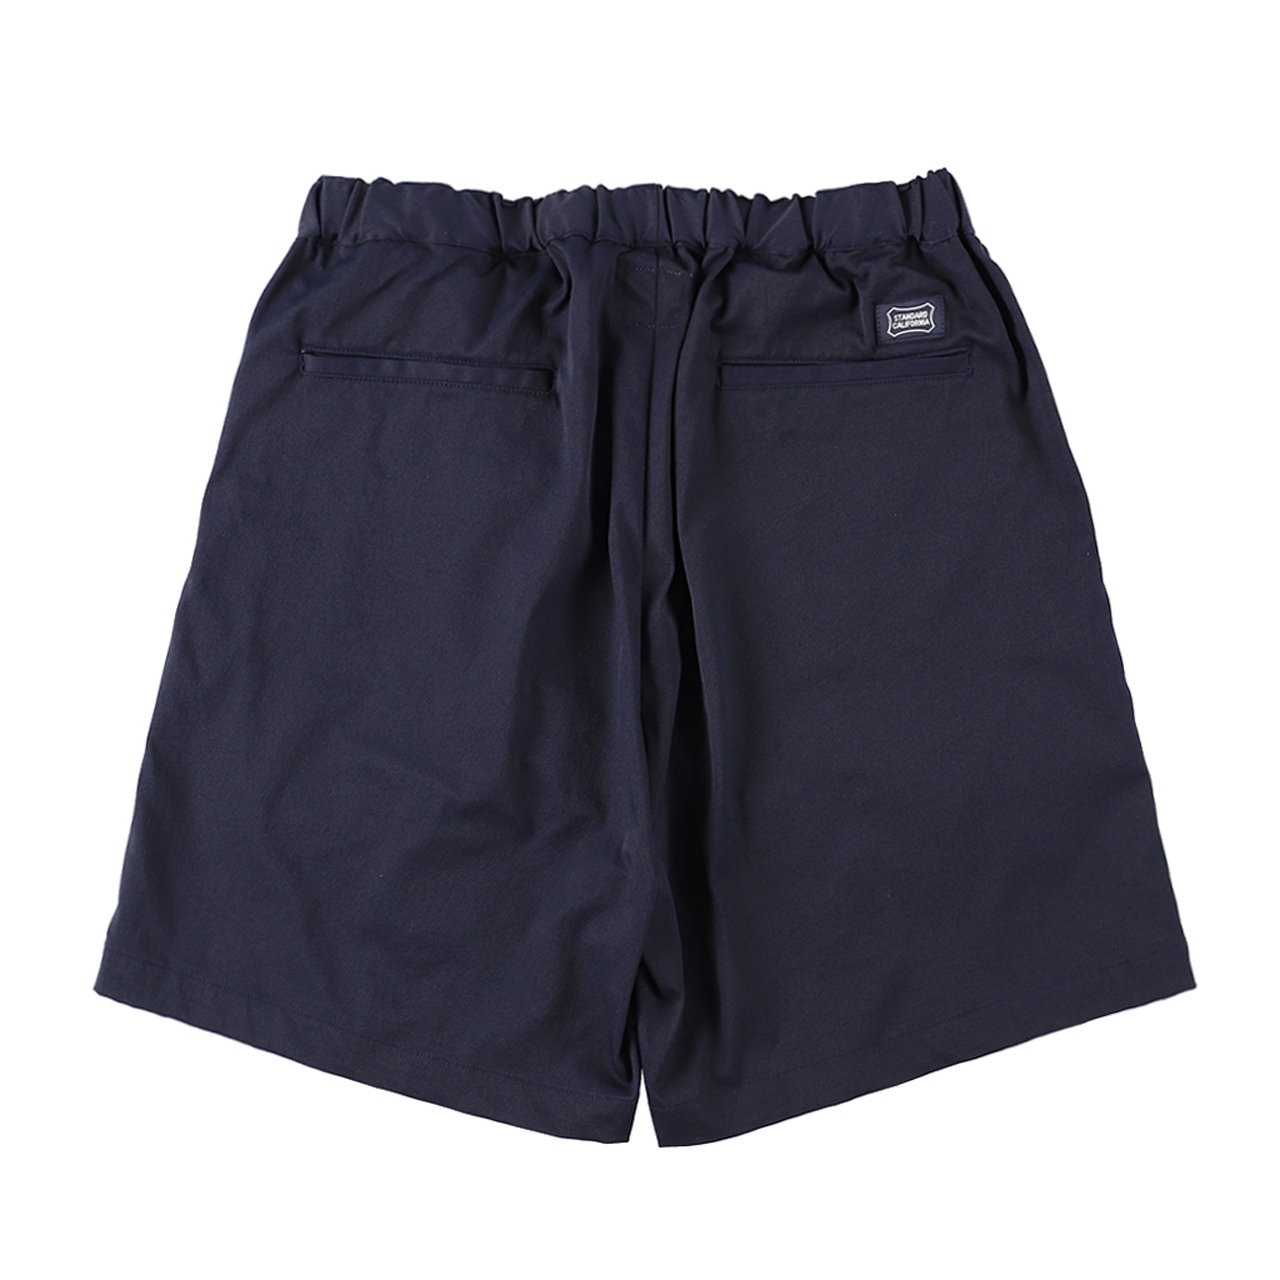 <img class='new_mark_img1' src='https://img.shop-pro.jp/img/new/icons5.gif' style='border:none;display:inline;margin:0px;padding:0px;width:auto;' />STANDARD CALIFORNIA ( ե˥)Easy Work Shorts Navy